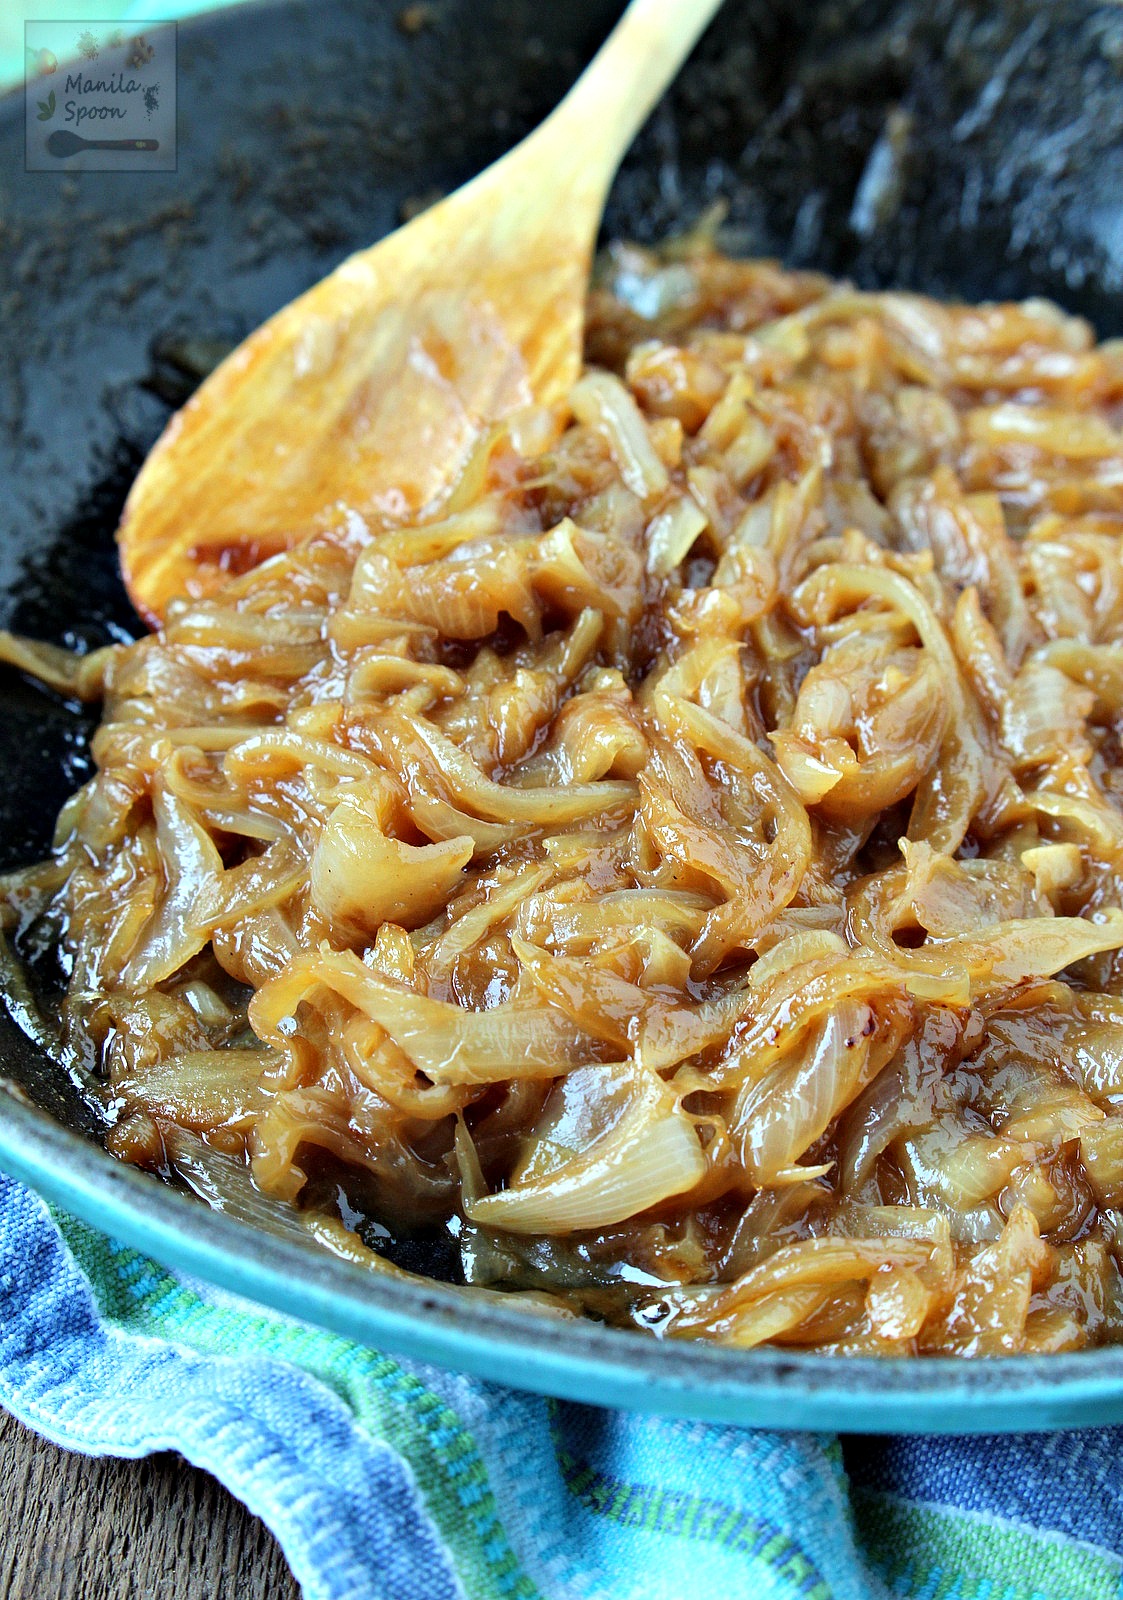 Just a few ingredients are needed to turn a batch of onions into something delightfully rich, sweet and savory. Use caramelized onions as pizza topping, for sandwiches, salad, to jazz up appetizers and so much more! | manilaspoon.com